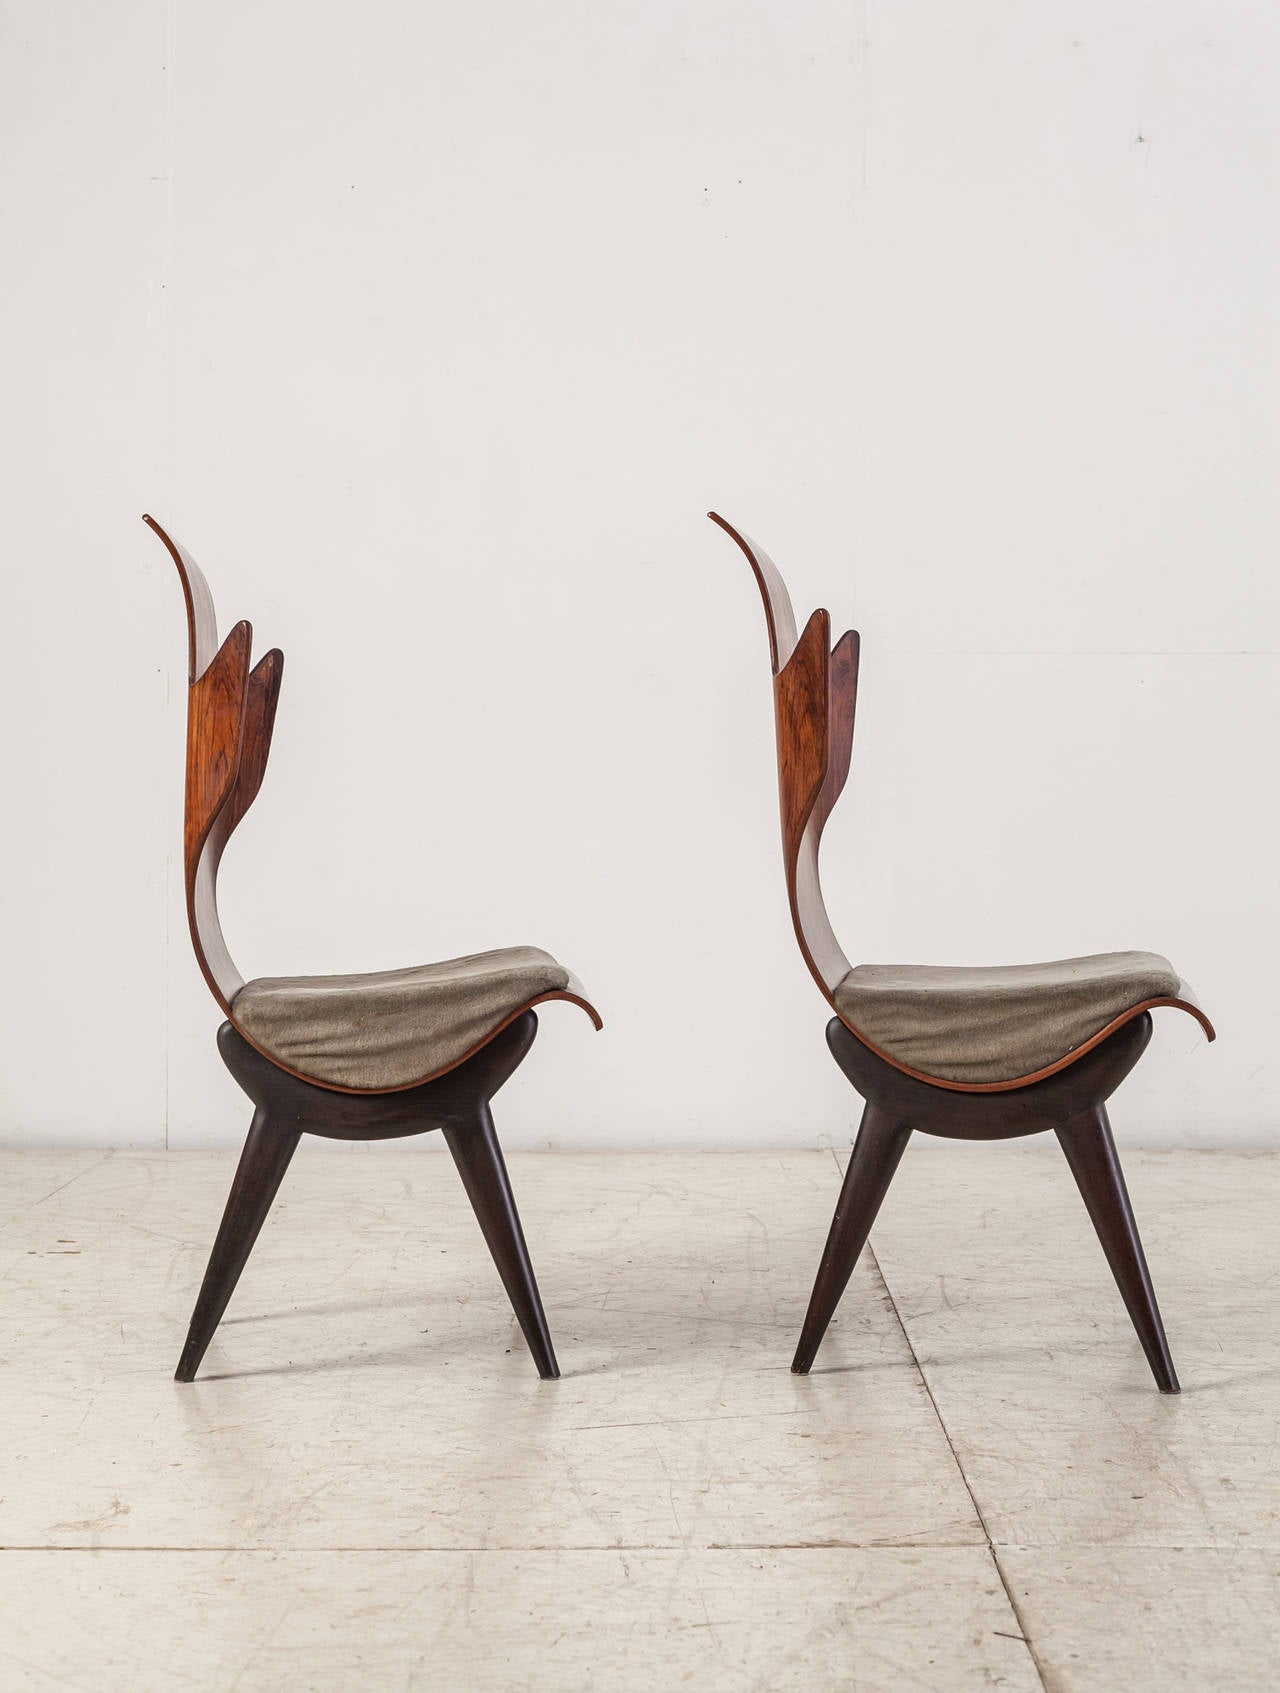 A pair of rare, sculptural Pozzi & Verga model ‘2/R’ or 'Flame' chairs, designed by Dante Latorre. The chairs are made of bent, laminated rosewood on an ebonized ash frame. They have fixed cushions with a grey velour upholstery.
The rosewood has a